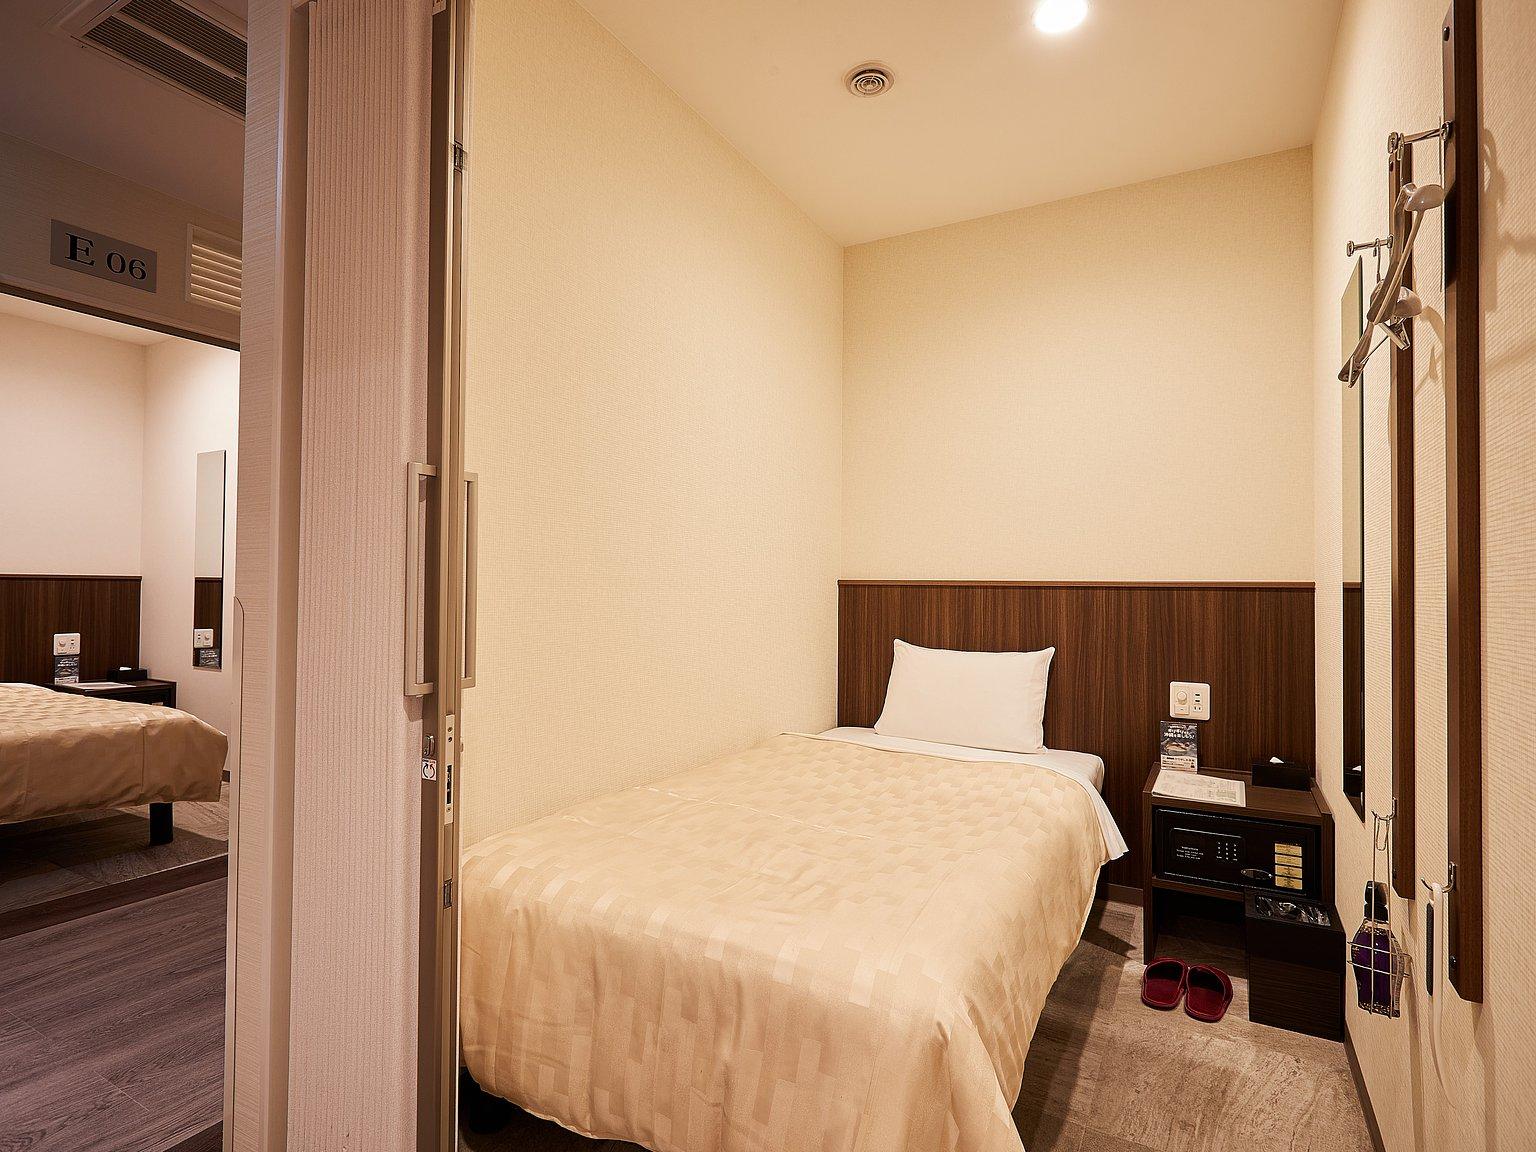 【Female Only】Single ※Shared shower and toilet - GRAND CABIN HOTEL NAHA OROKU